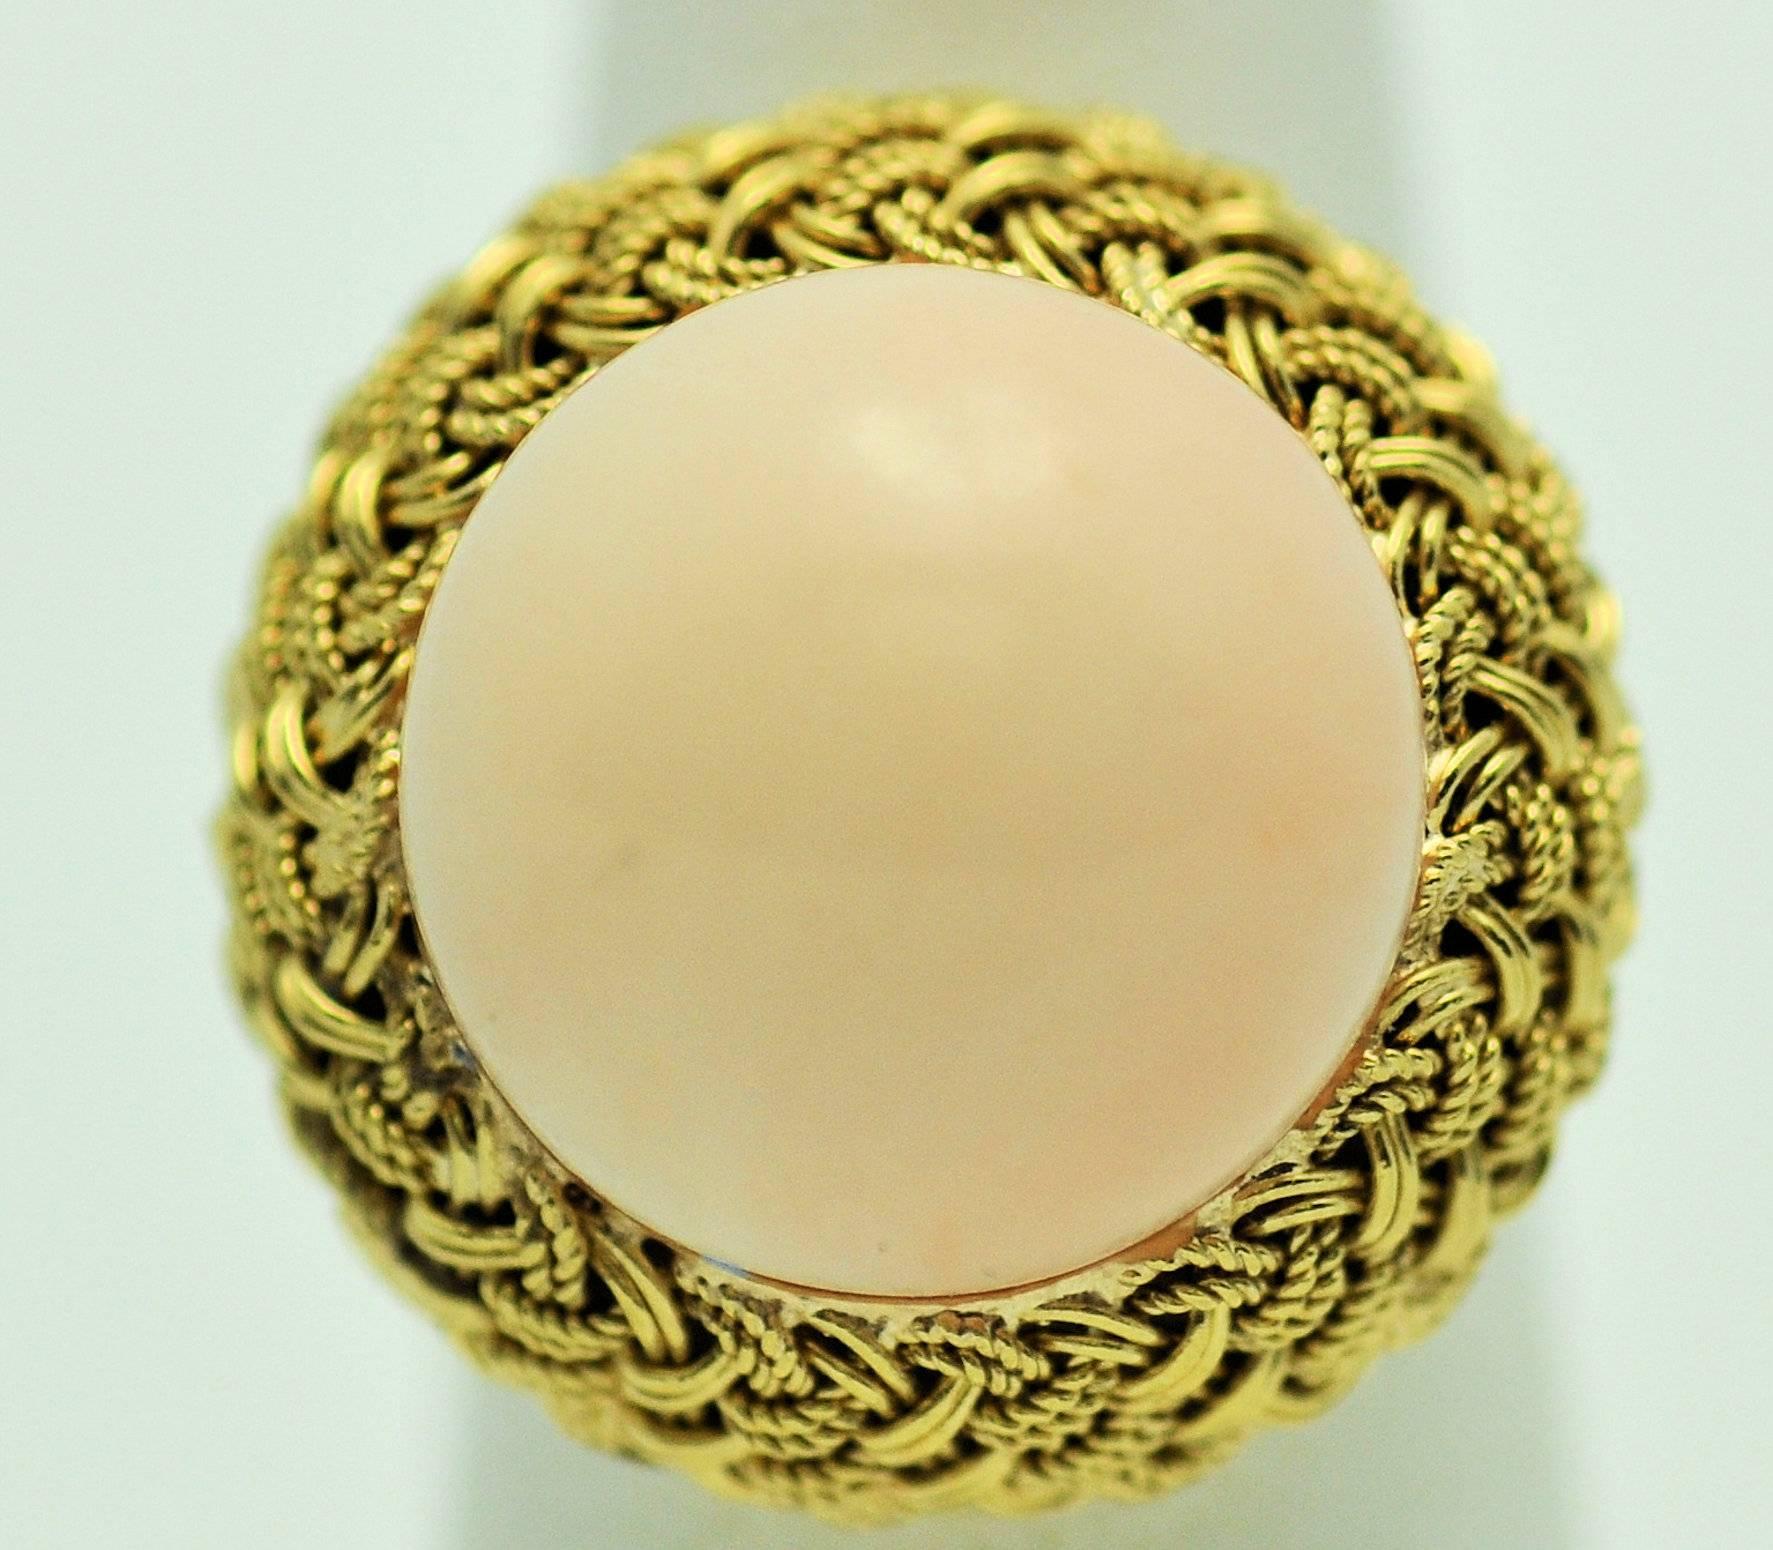 18Karat yellow gold angel skin coral ring with woven gold border and center of light pink coral.  Nice, high dome cabochon of coral, excellent surface.  Even color.  Completely natural, not dyed or treated.  Coral measures 15 mm. in diameter. 